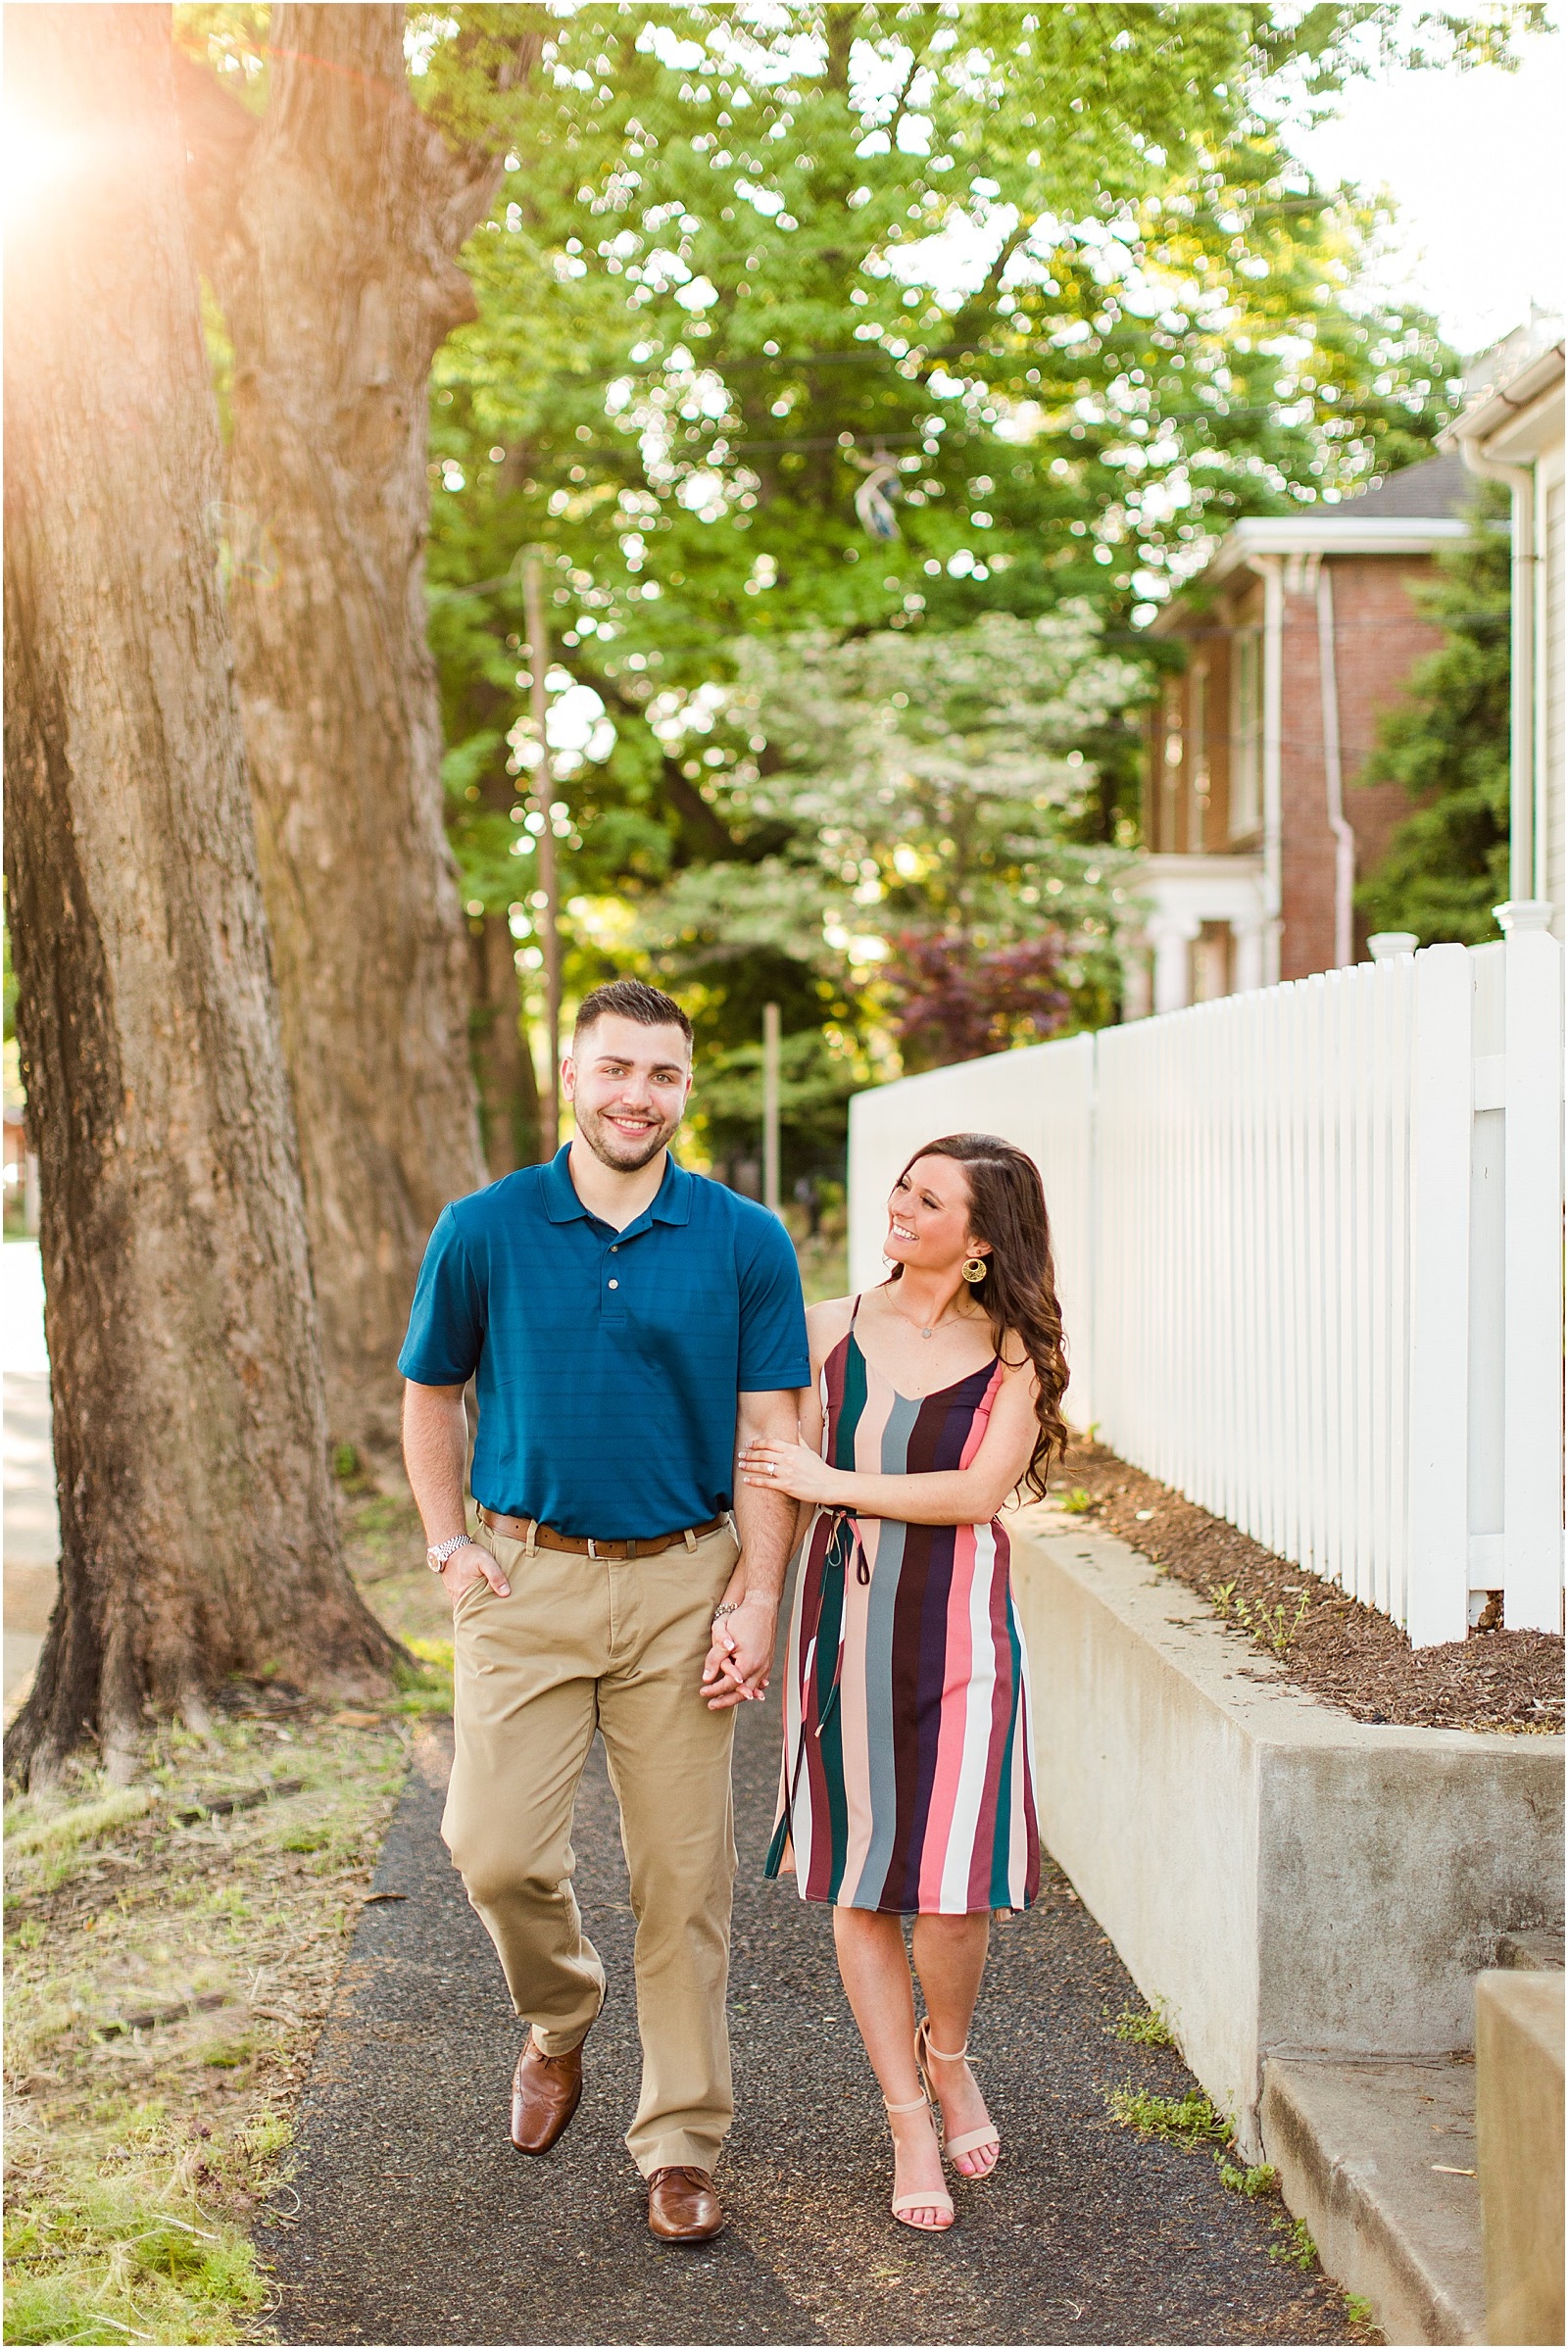 Downtown Newburgh Engagement Session | Matt and Blaire | Bret and Brandie Photography017.jpg